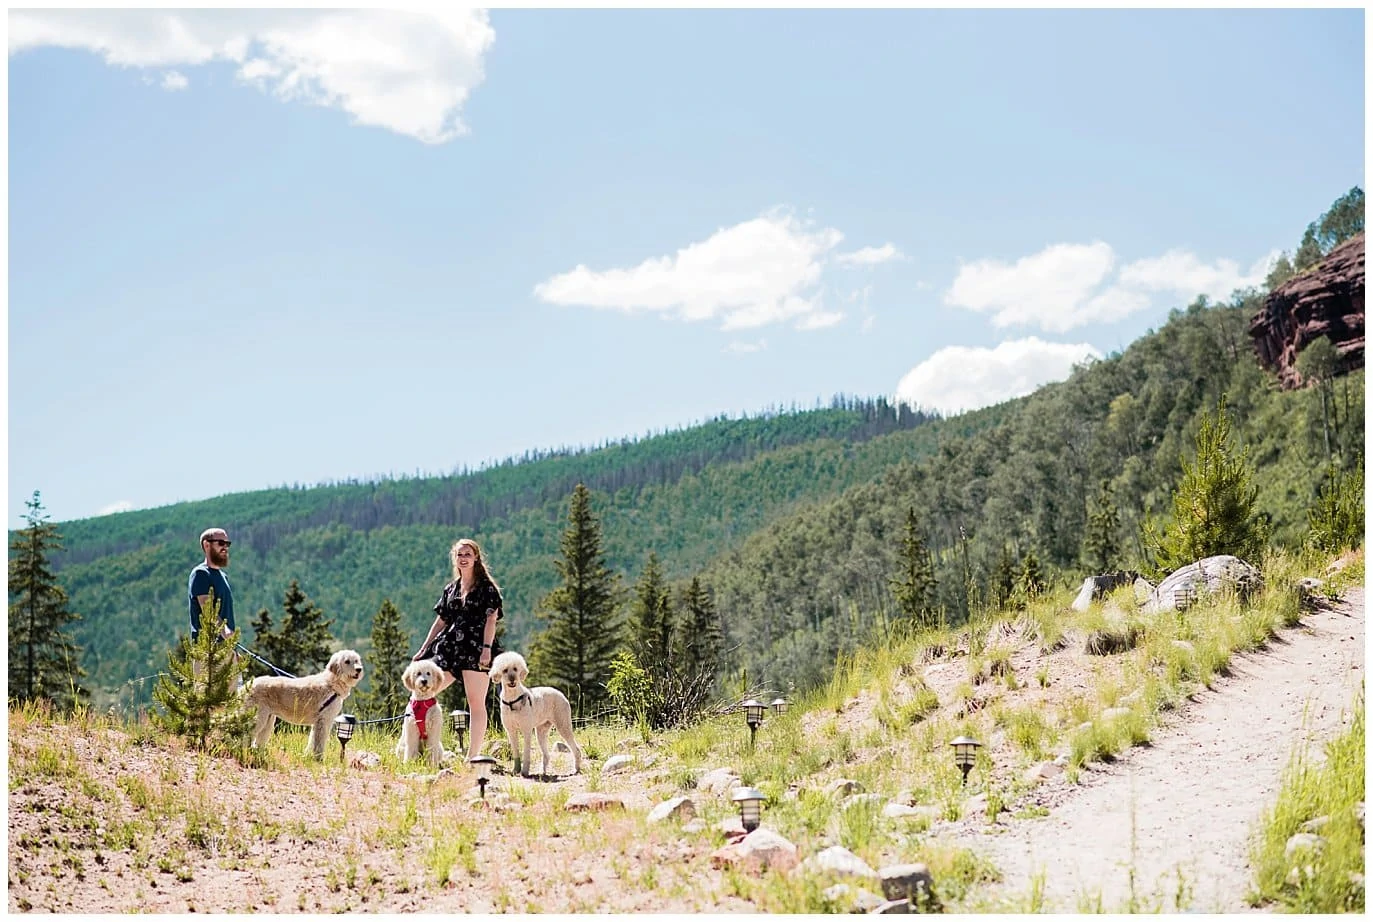 Dogs on hillside at Summer Piney River Ranch wedding by Vail wedding photographer Jennie Crate, Photographer